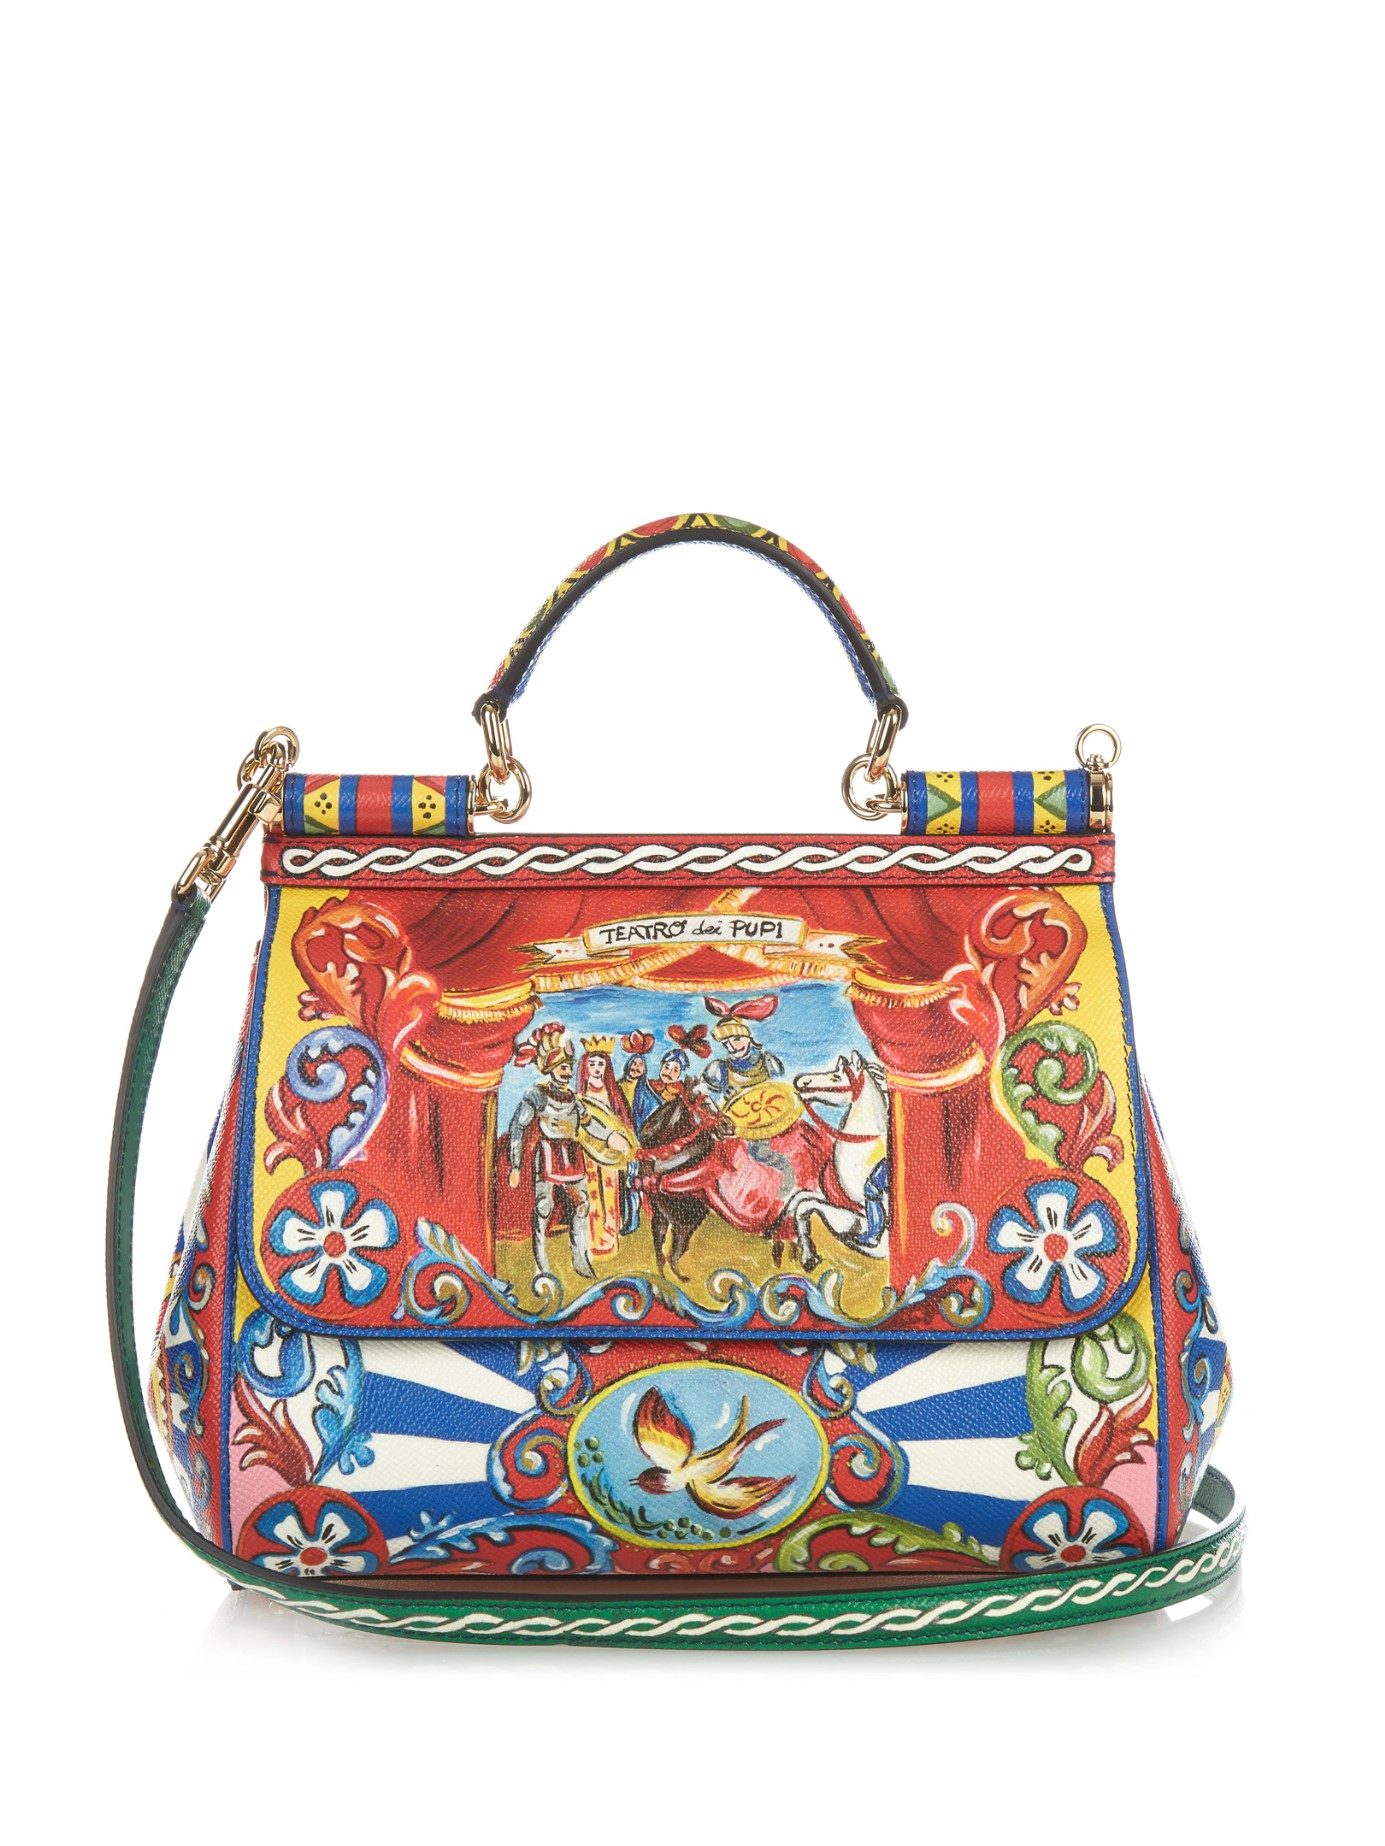 Lyst - Dolce & Gabbana Sicily Medium Carretto-print Leather Bag in Red